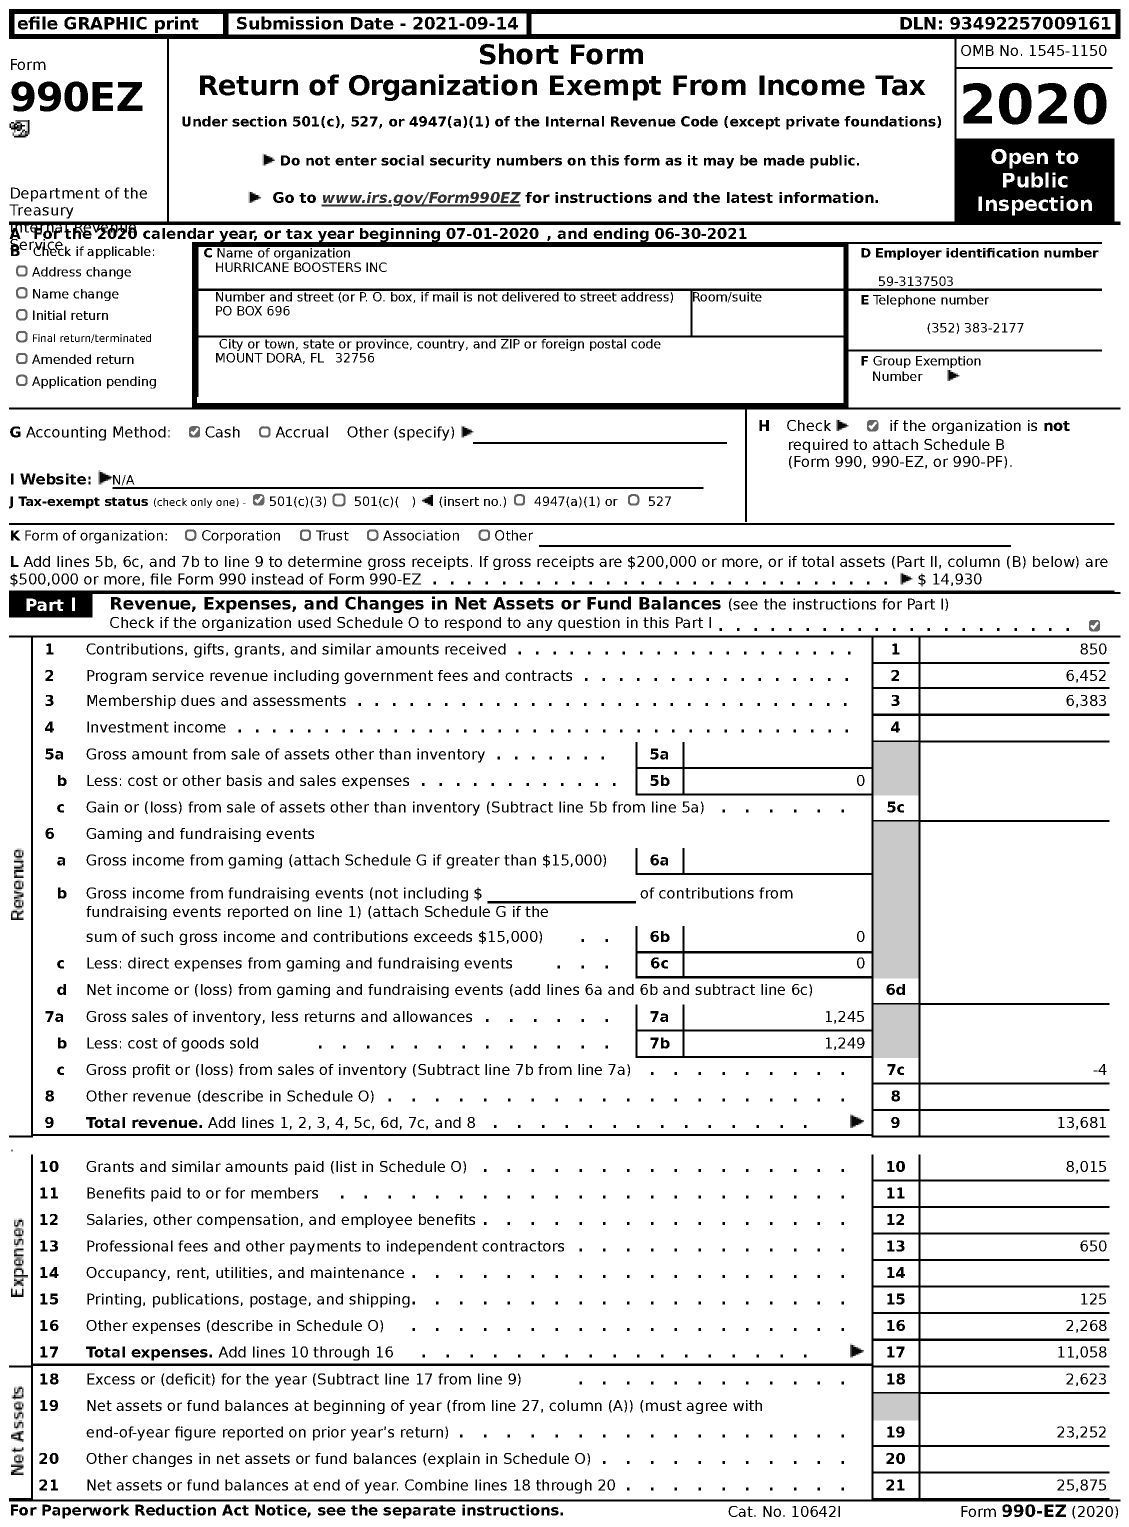 Image of first page of 2020 Form 990EZ for Hurricane Boosters